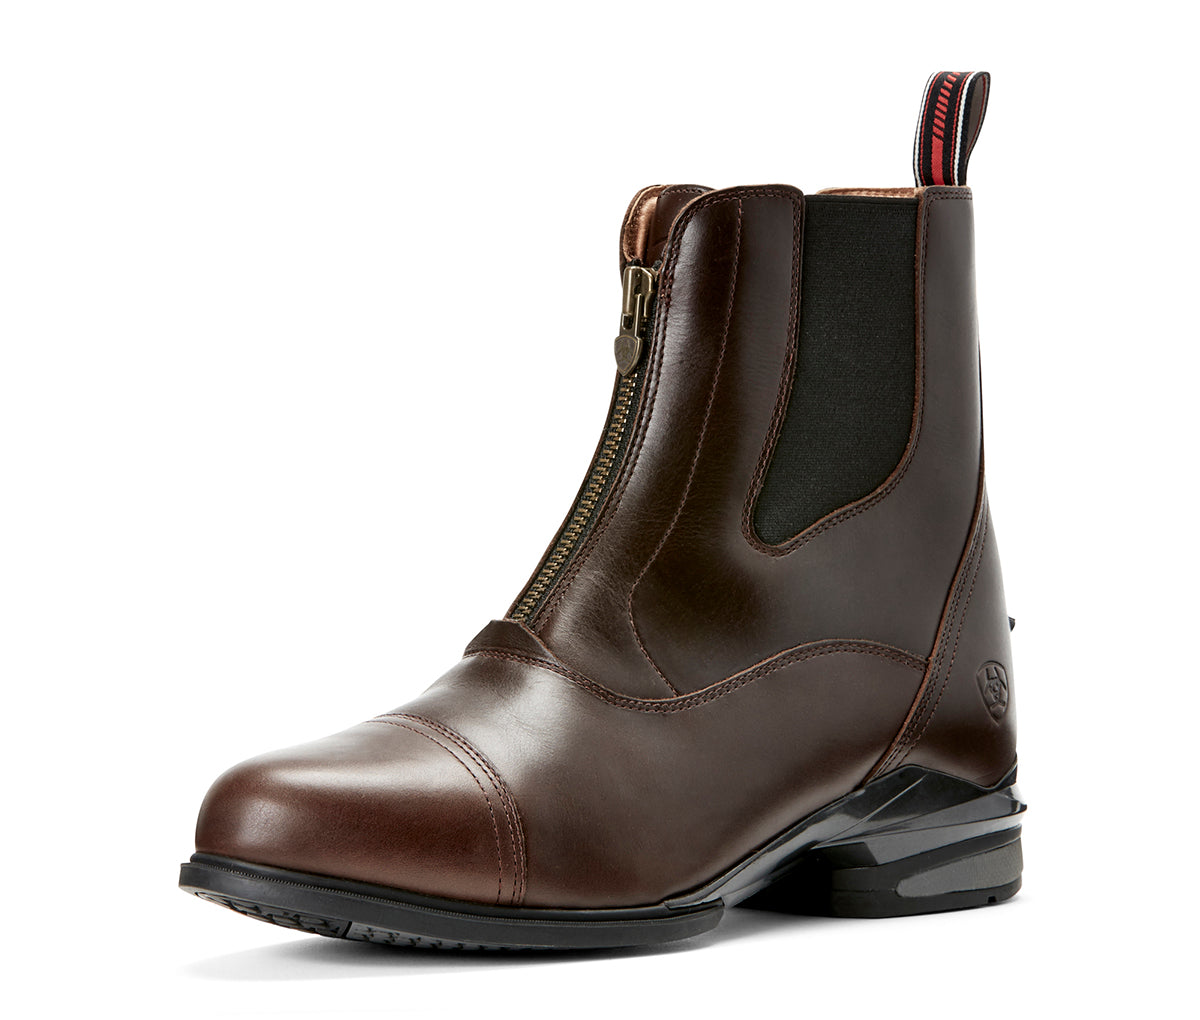 Men's Ariat Devon Nitro Paddock Boot in Waxed Chocolate from the front